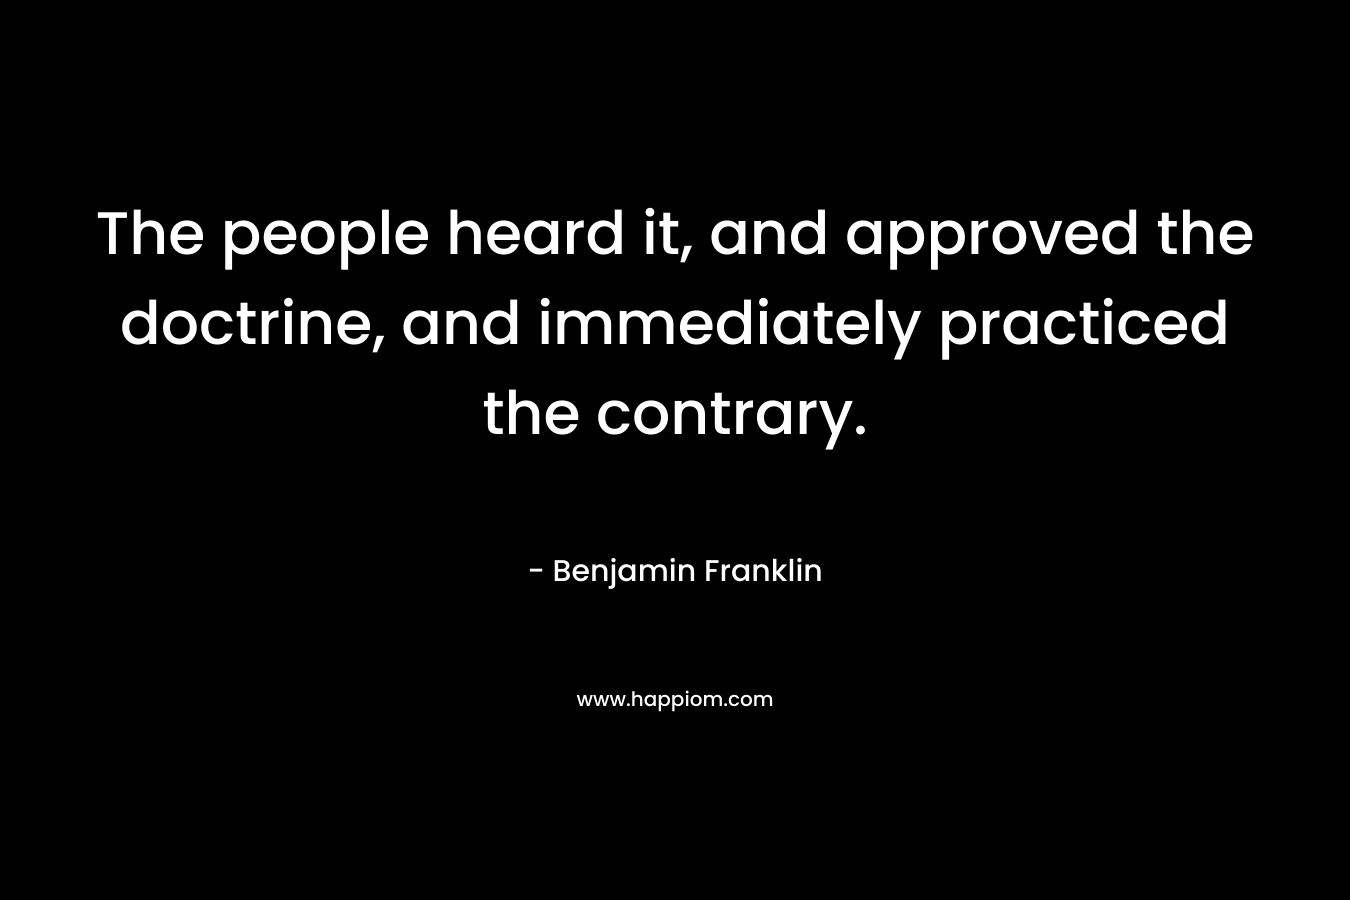 The people heard it, and approved the doctrine, and immediately practiced the contrary.